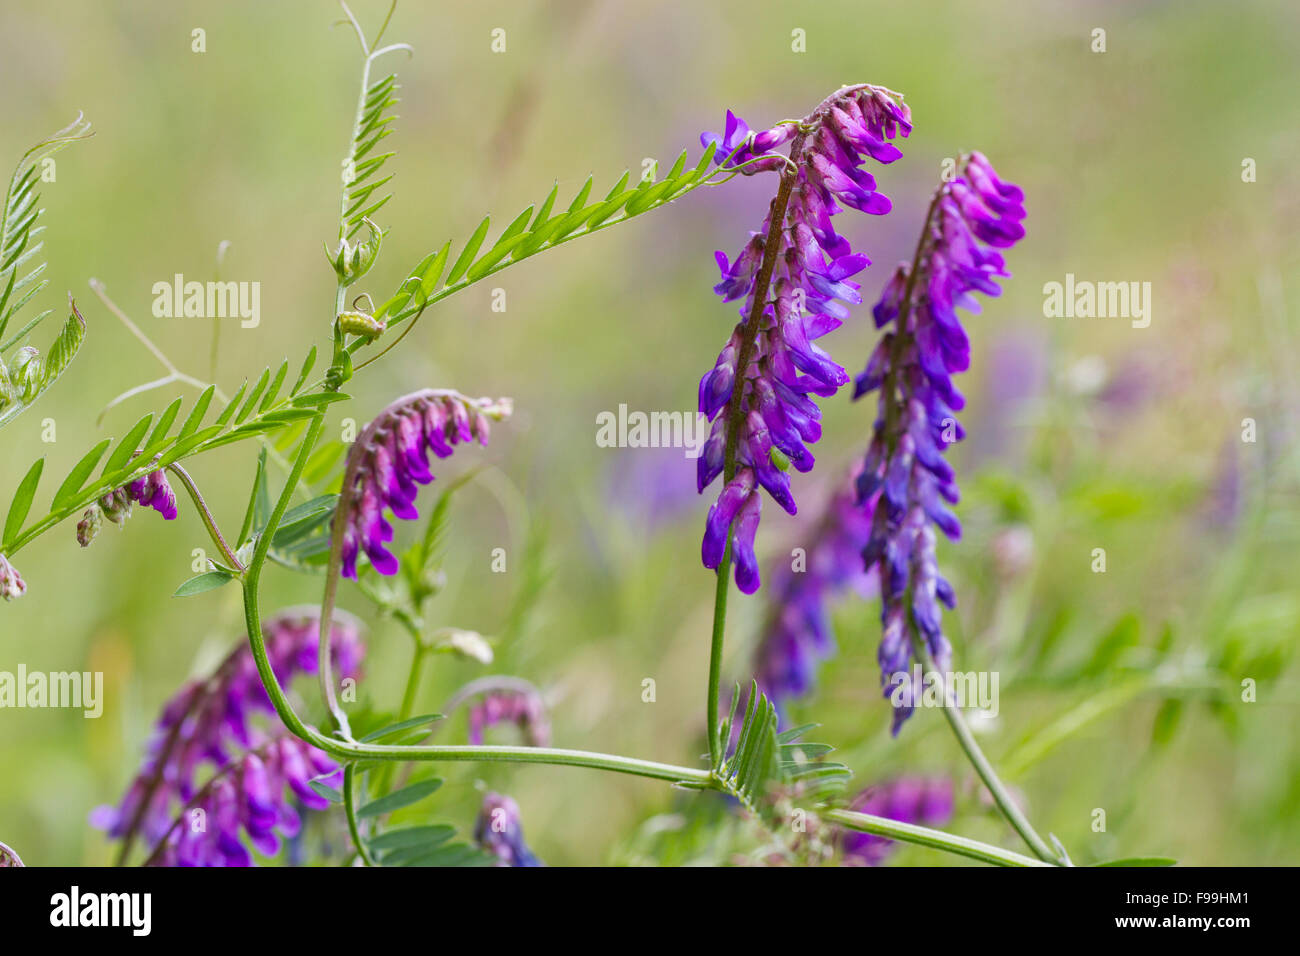 Tufted Vetch (Vicia cracca) flowering. Powys, Wales. July. Stock Photo